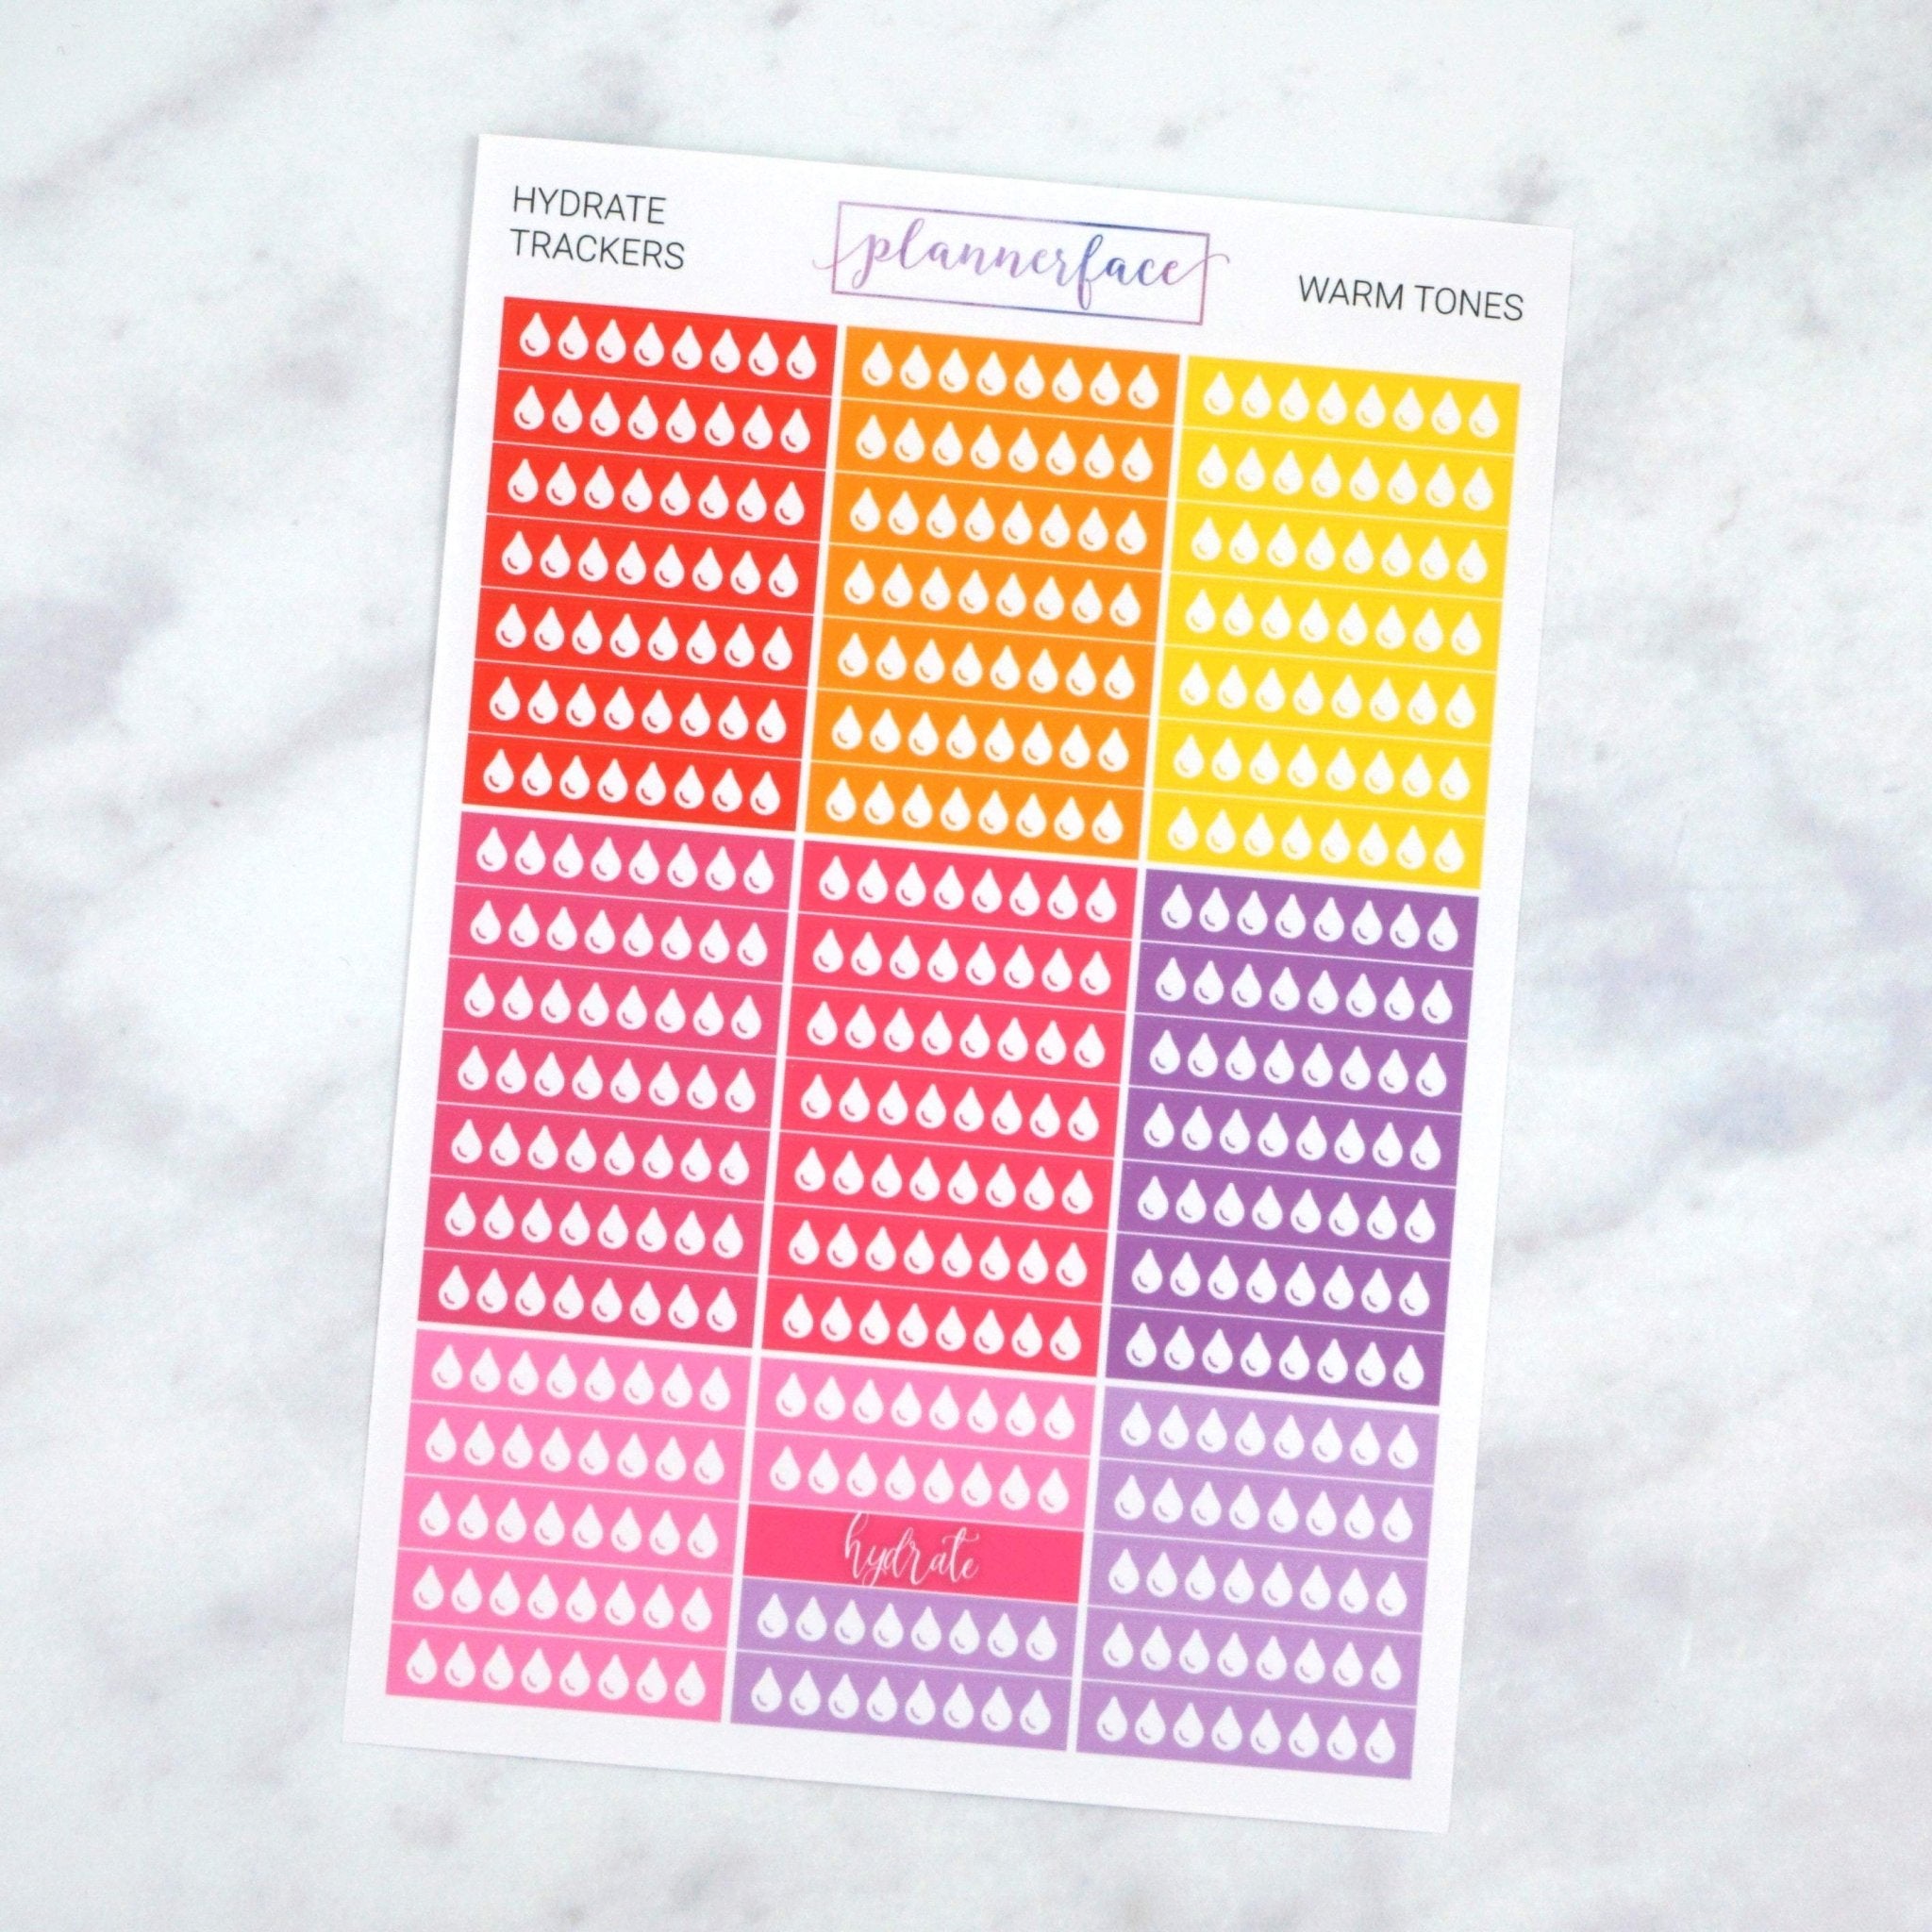 Hydrate Trackers - WARM | Multicolour by Plannerface